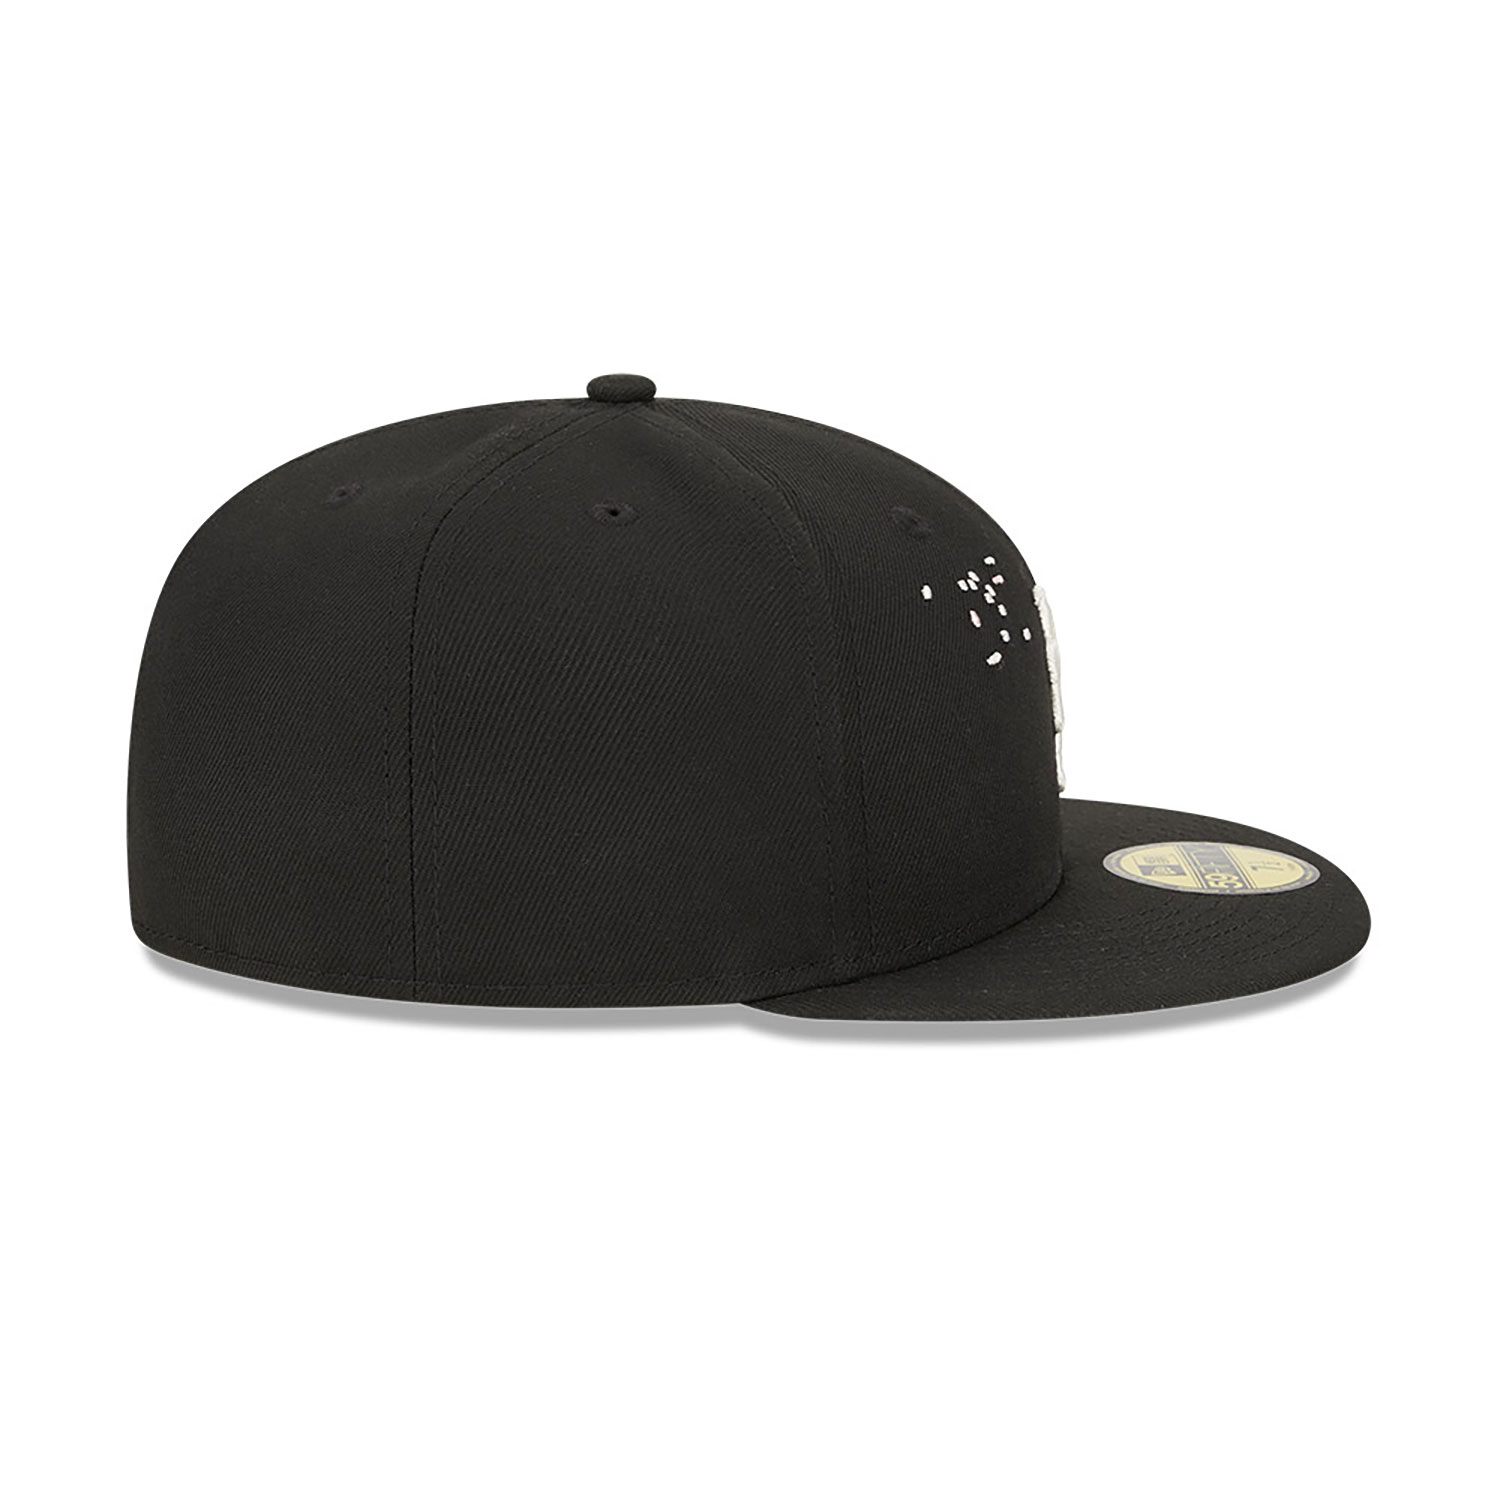 New York Mets Cherry Blossom Black 59FIFTY Fitted Cap